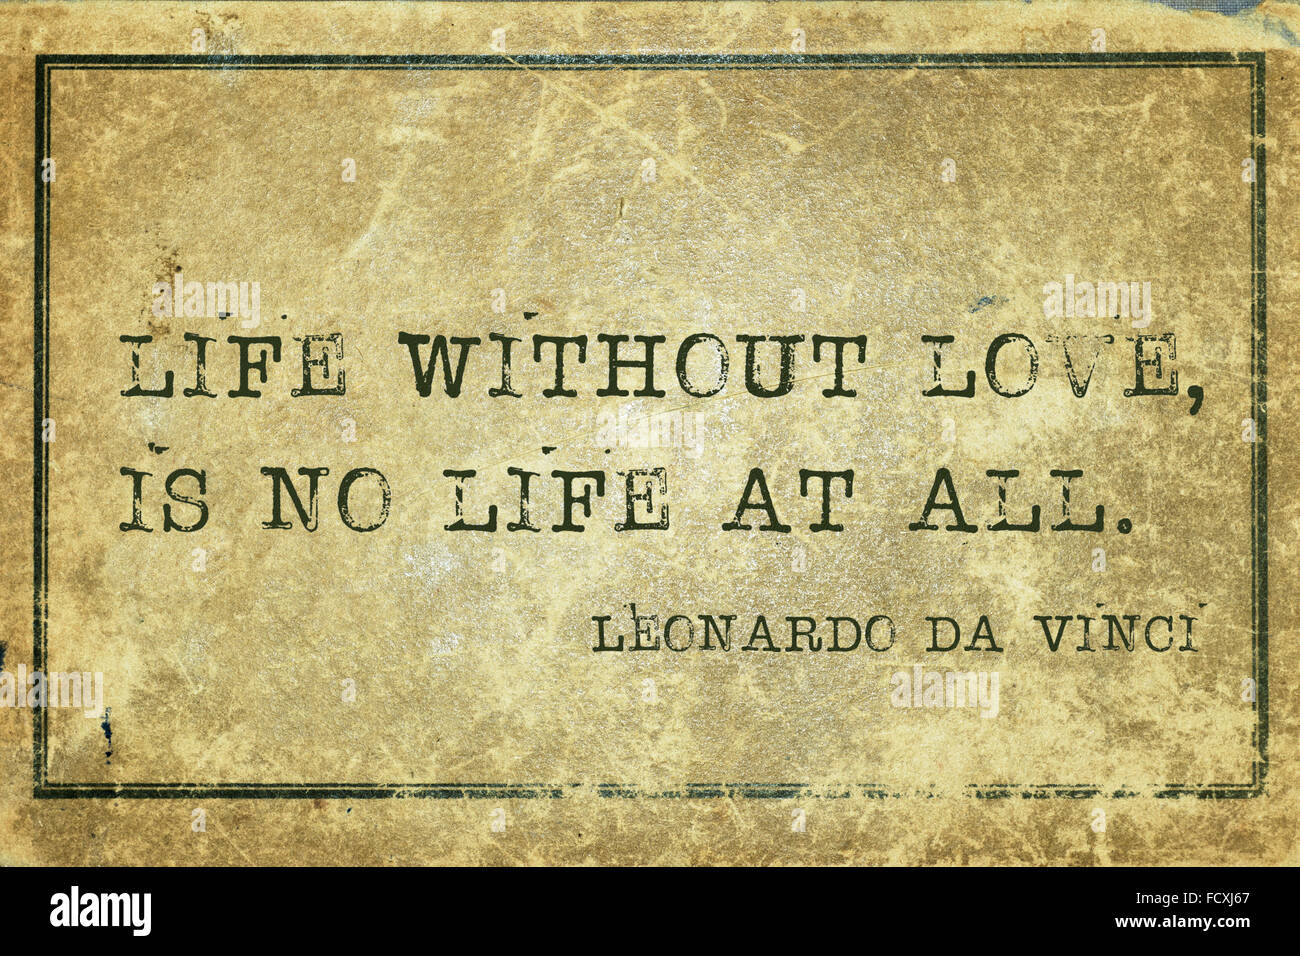 life without love, is no life at all - ancient Italian artist Leonardo da Vinci quote printed on grunge vintage cardboard Stock Photo